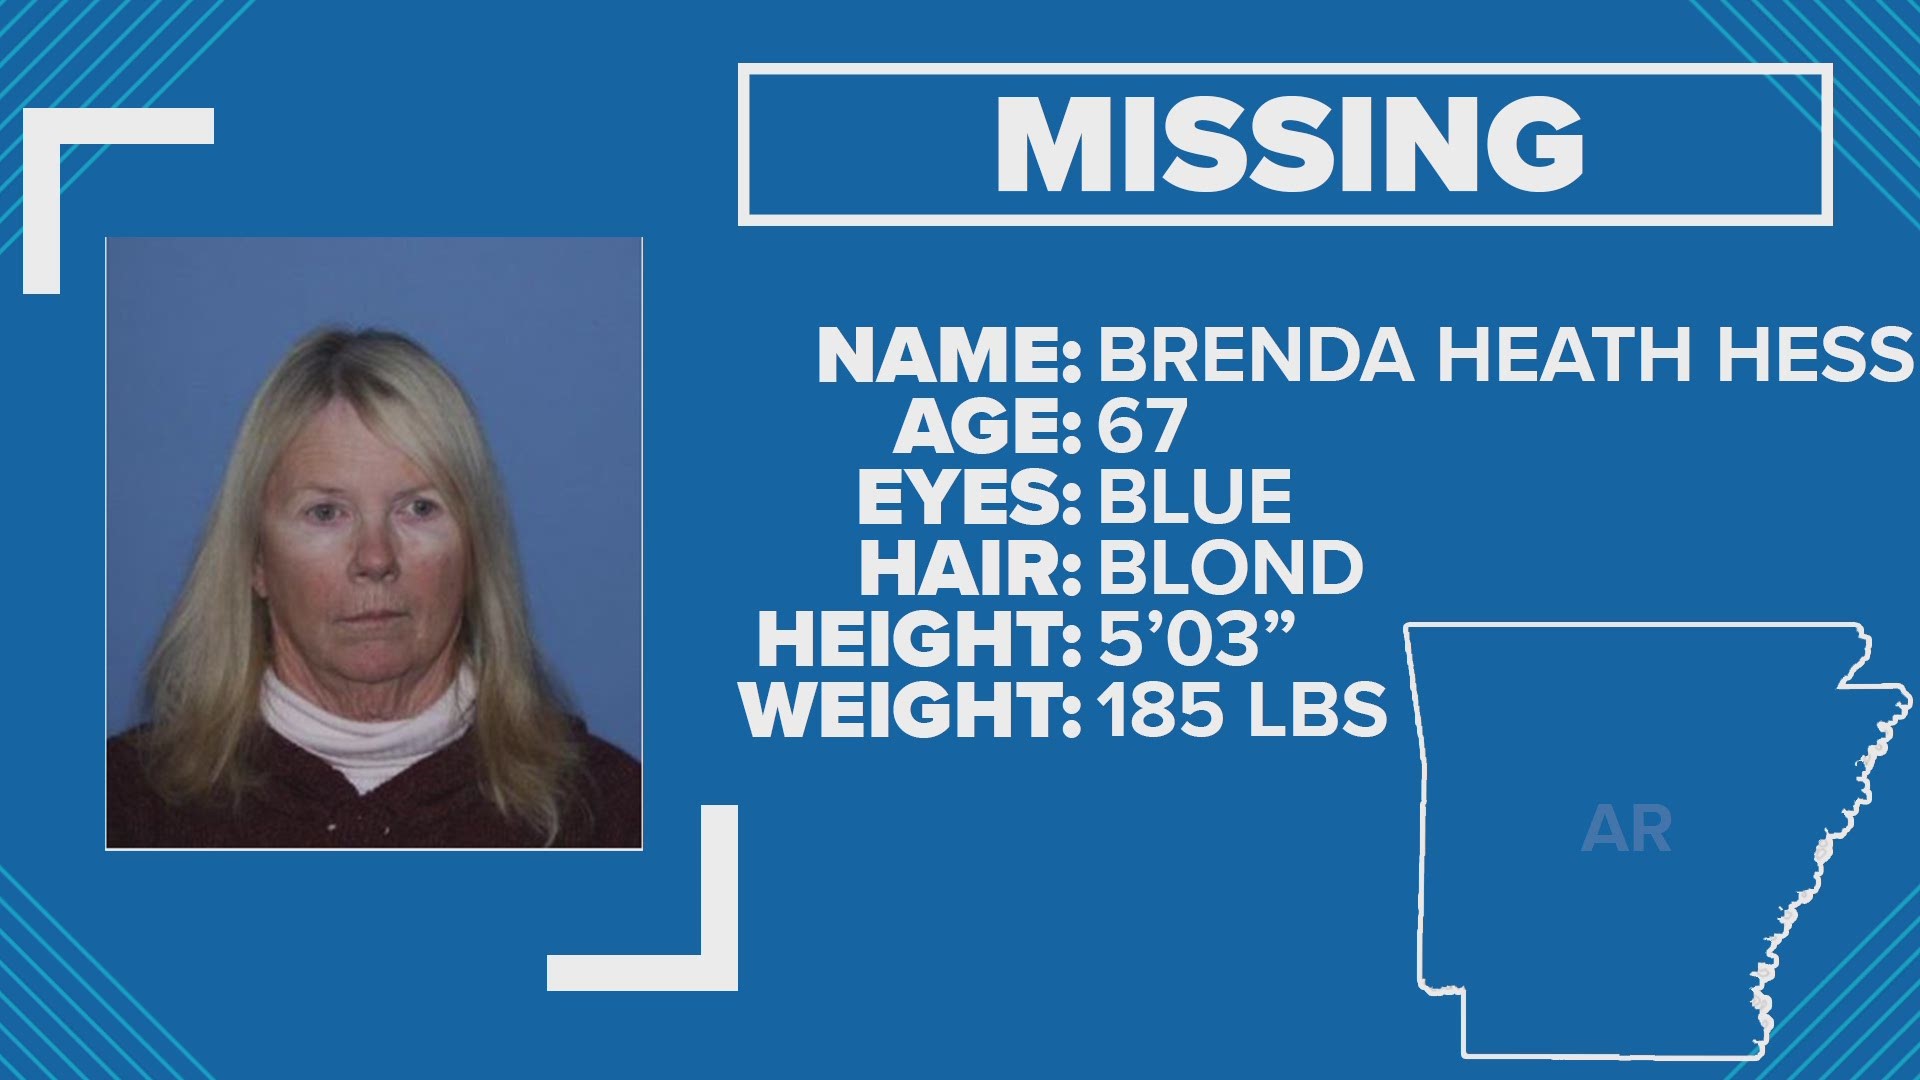 Arkansas police searching for missing 67-year-old woman